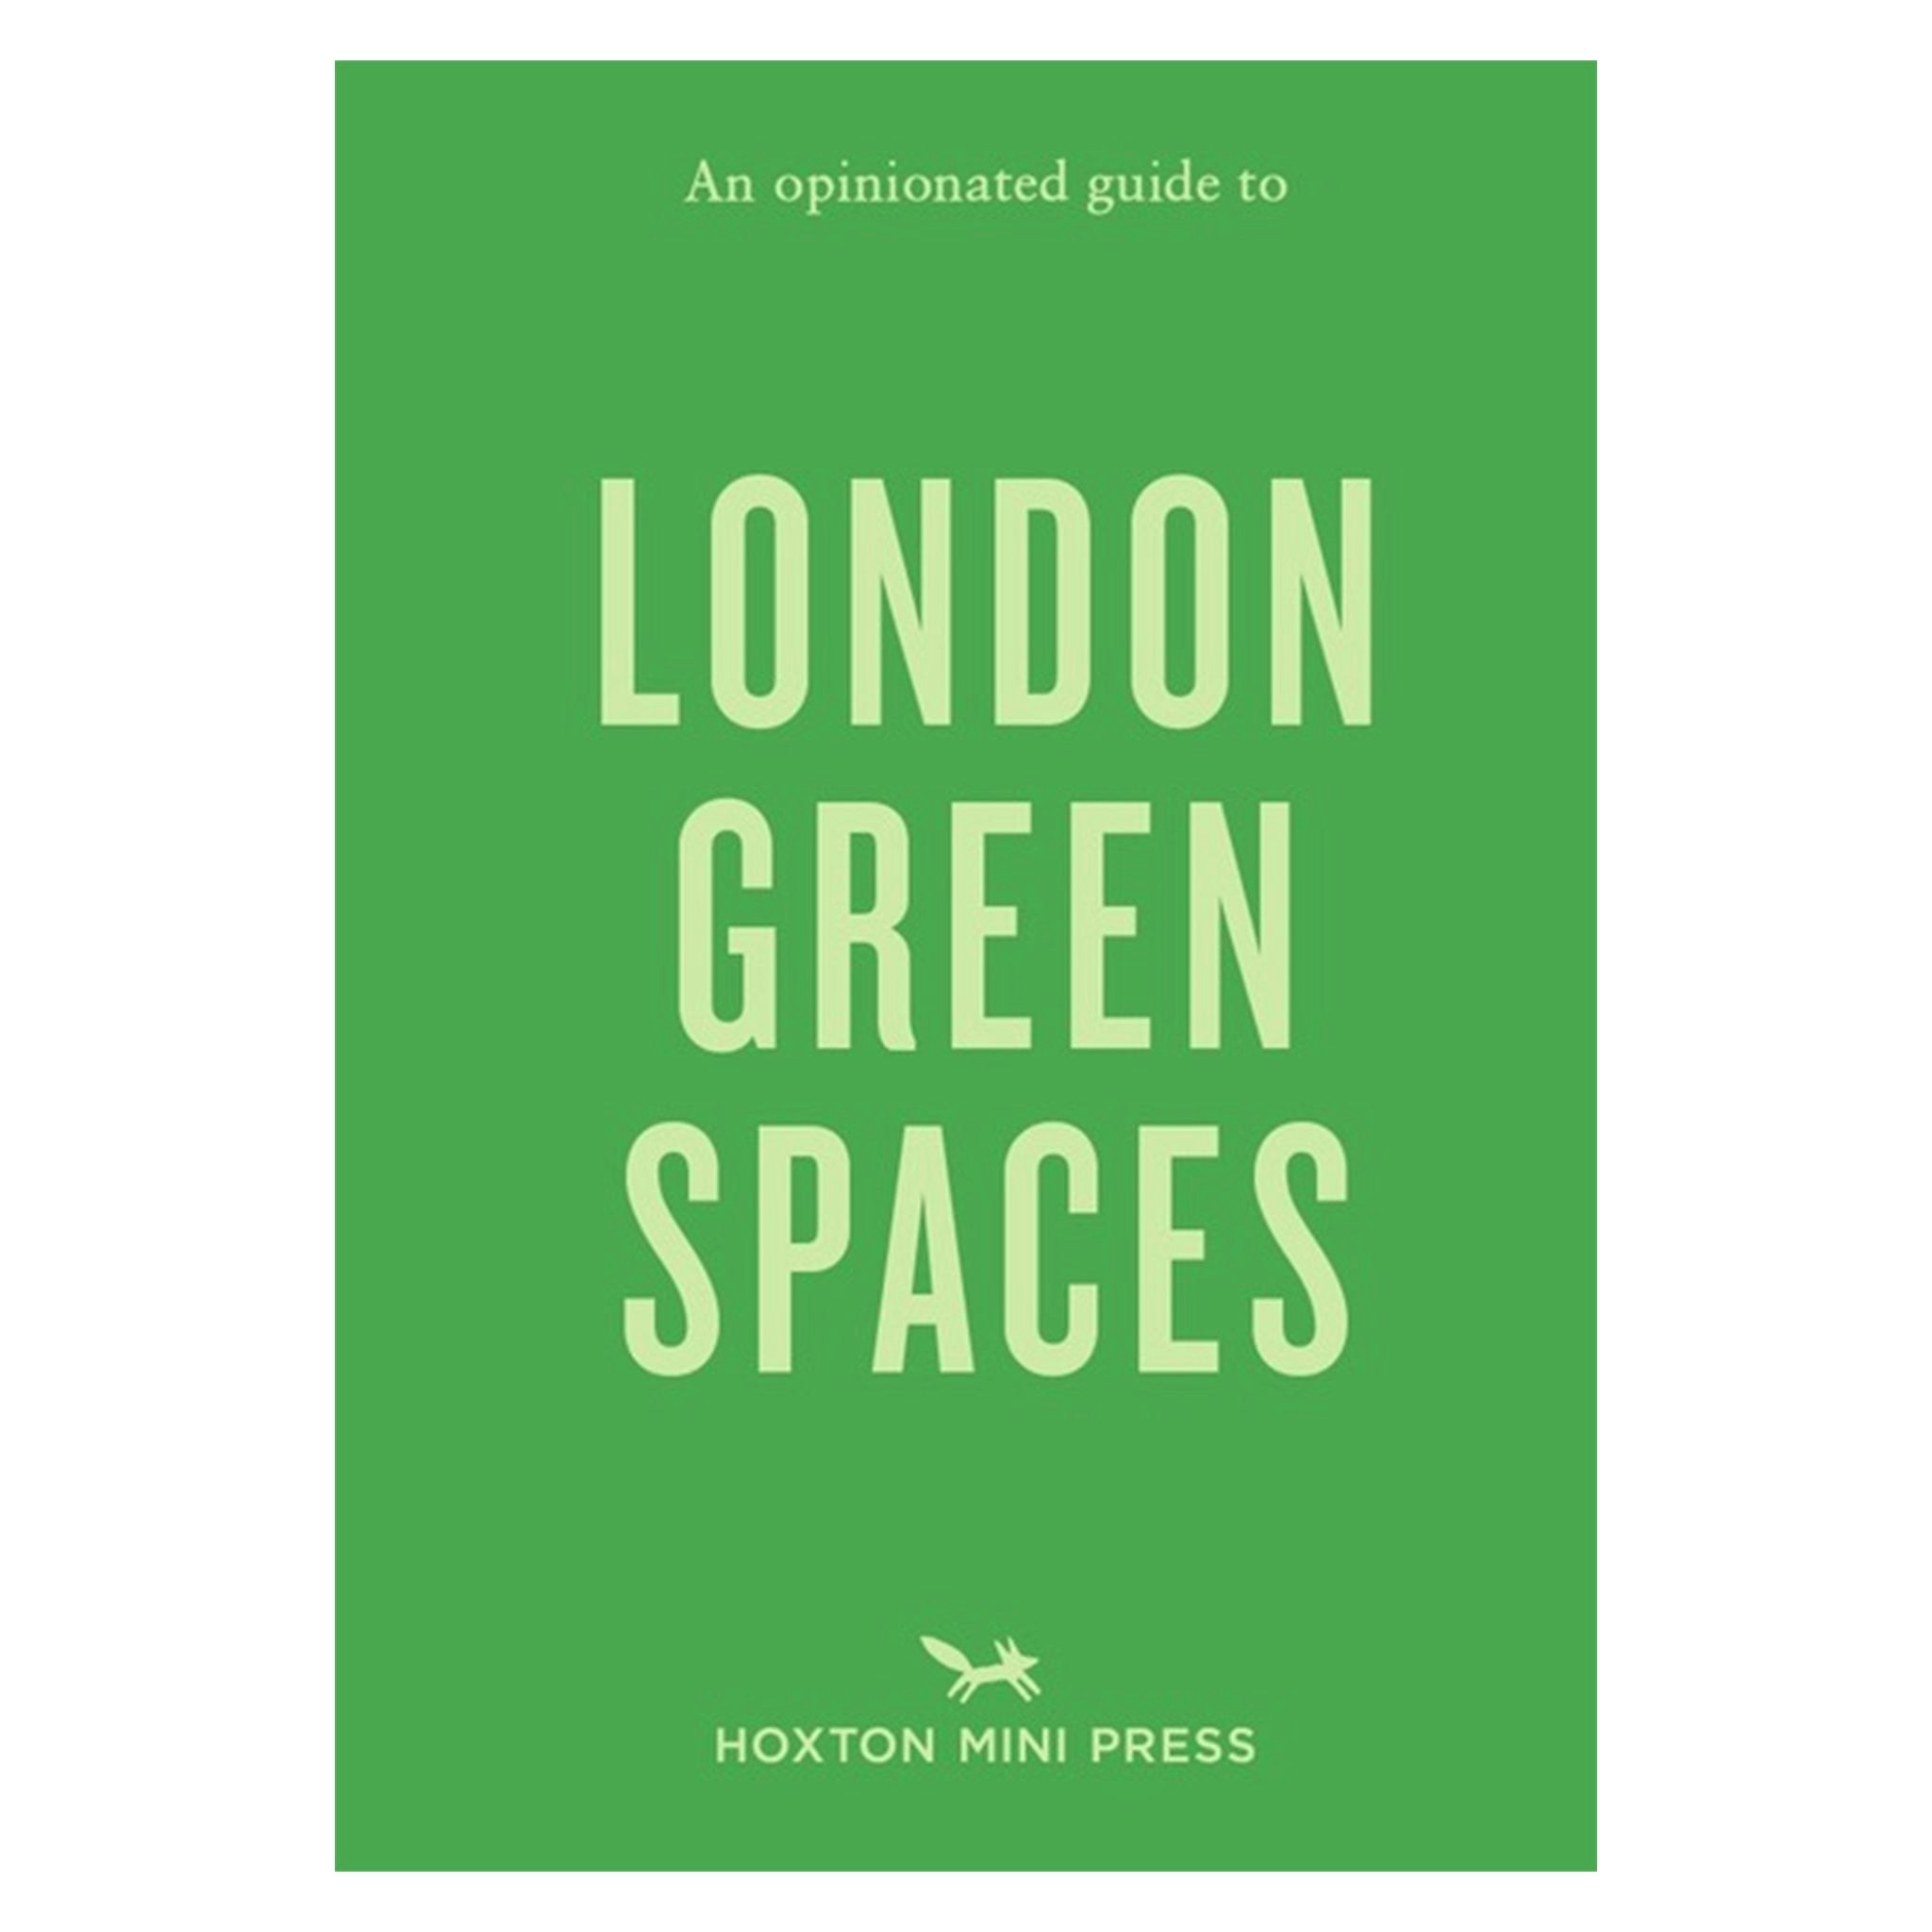 An Opinionated Guide to London Green Spaces by Hoxton Mini Press